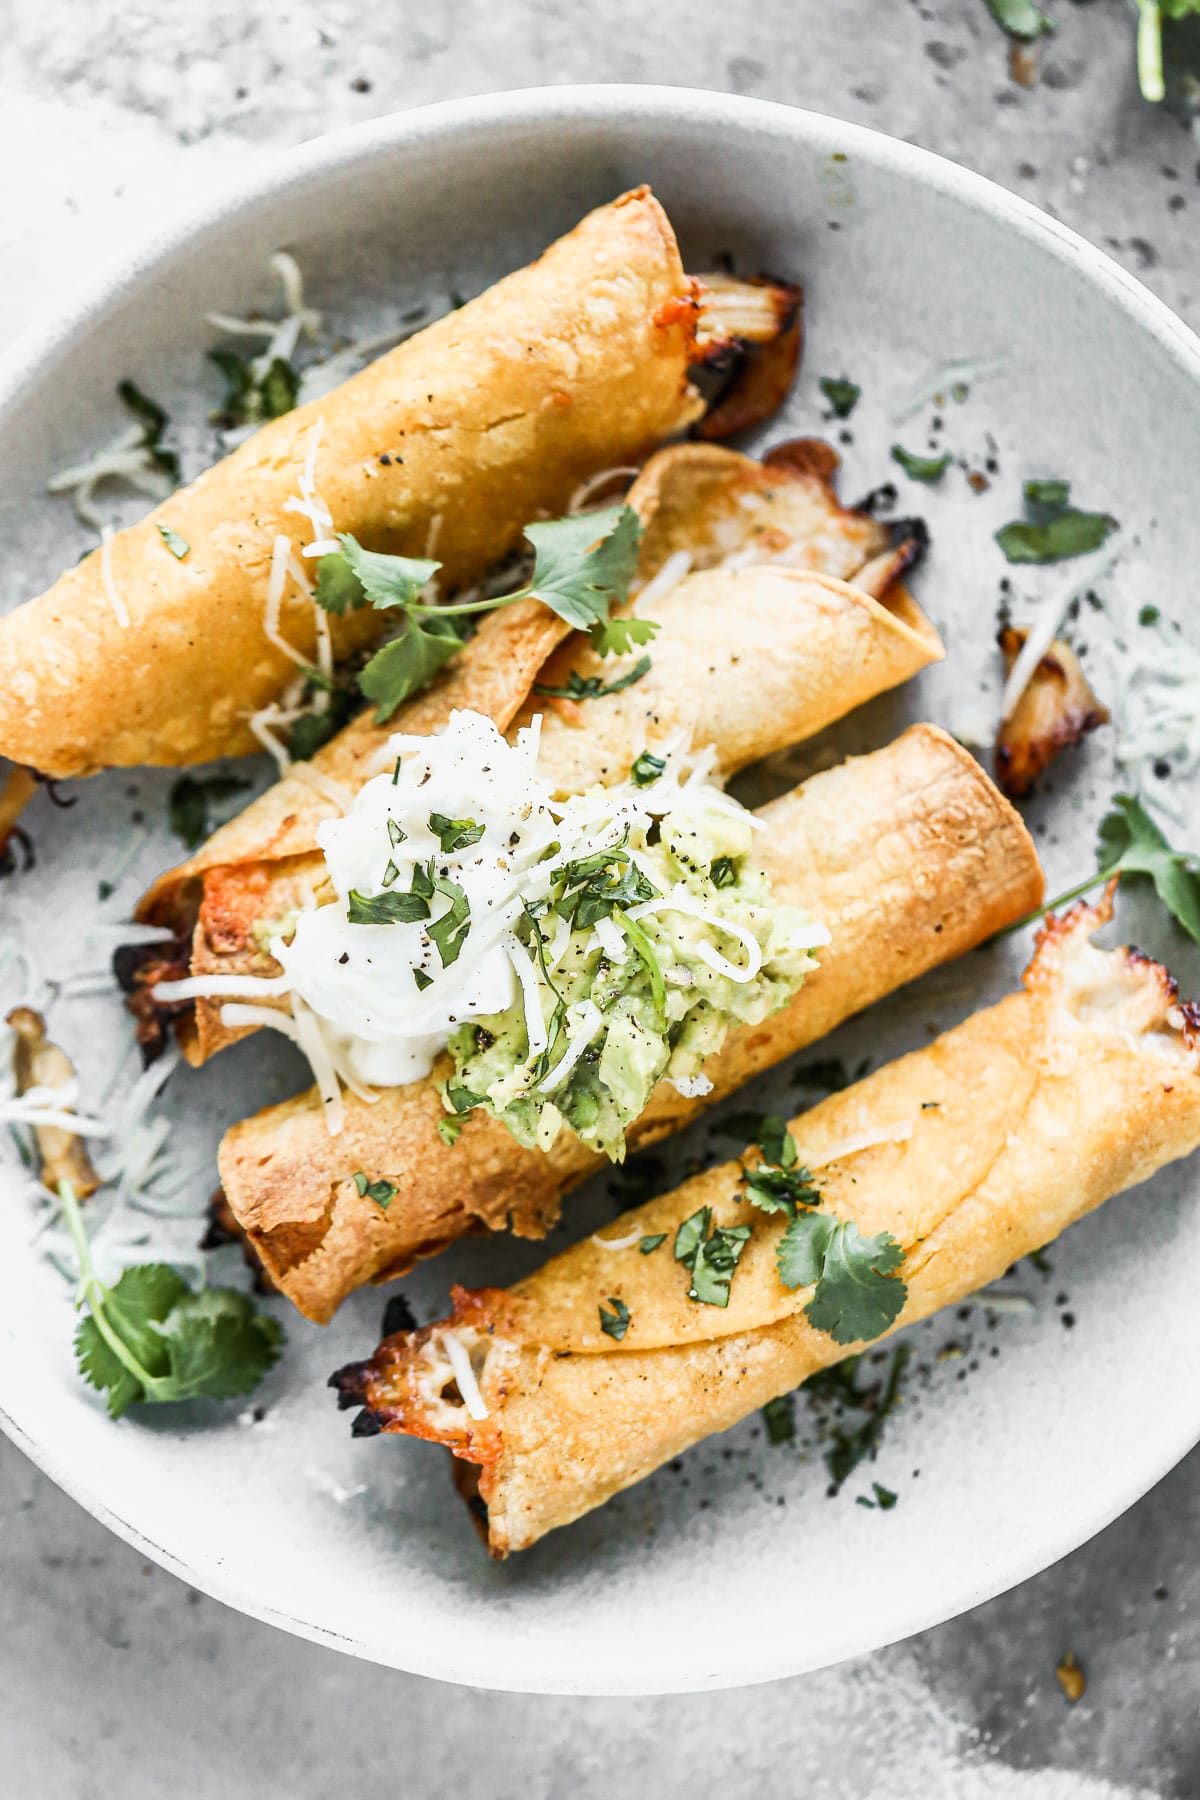 Irresistibly crispy on the outside and filled with shredded honey lime chicken and plenty of melted monterey jack cheese on the inside, our Air Fryer Taquitos are the perfect Game Day snack. Serve shredded cheese, an easy guac and plenty of lime sour cream to finish them off.&nbsp;